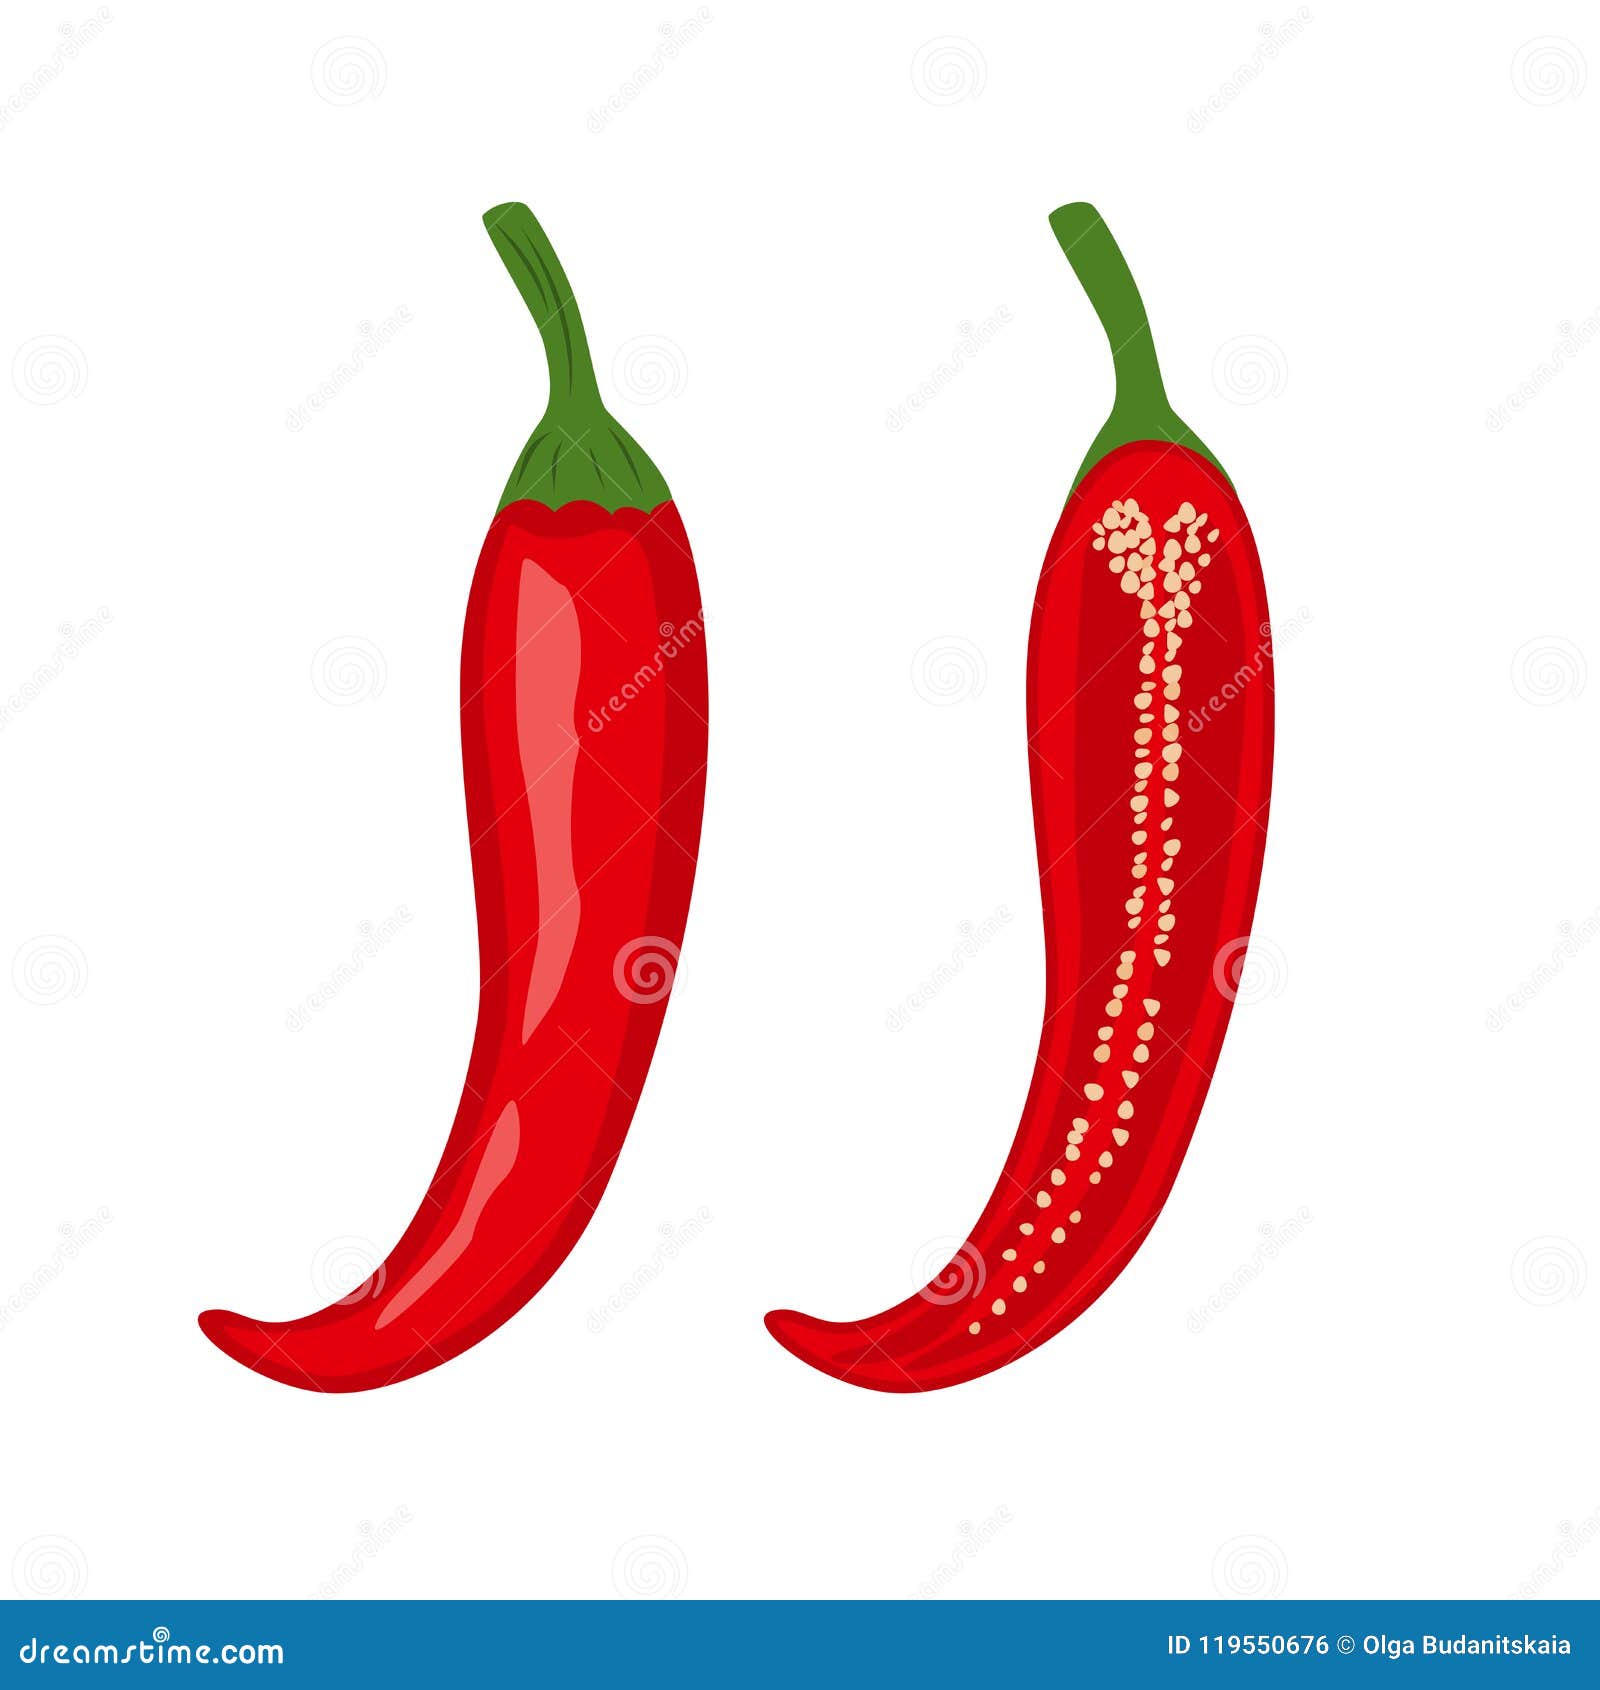 Colorful Whole and Half Red Hot Chili Vegetable Stock Vector - Illustration of food, 119550676